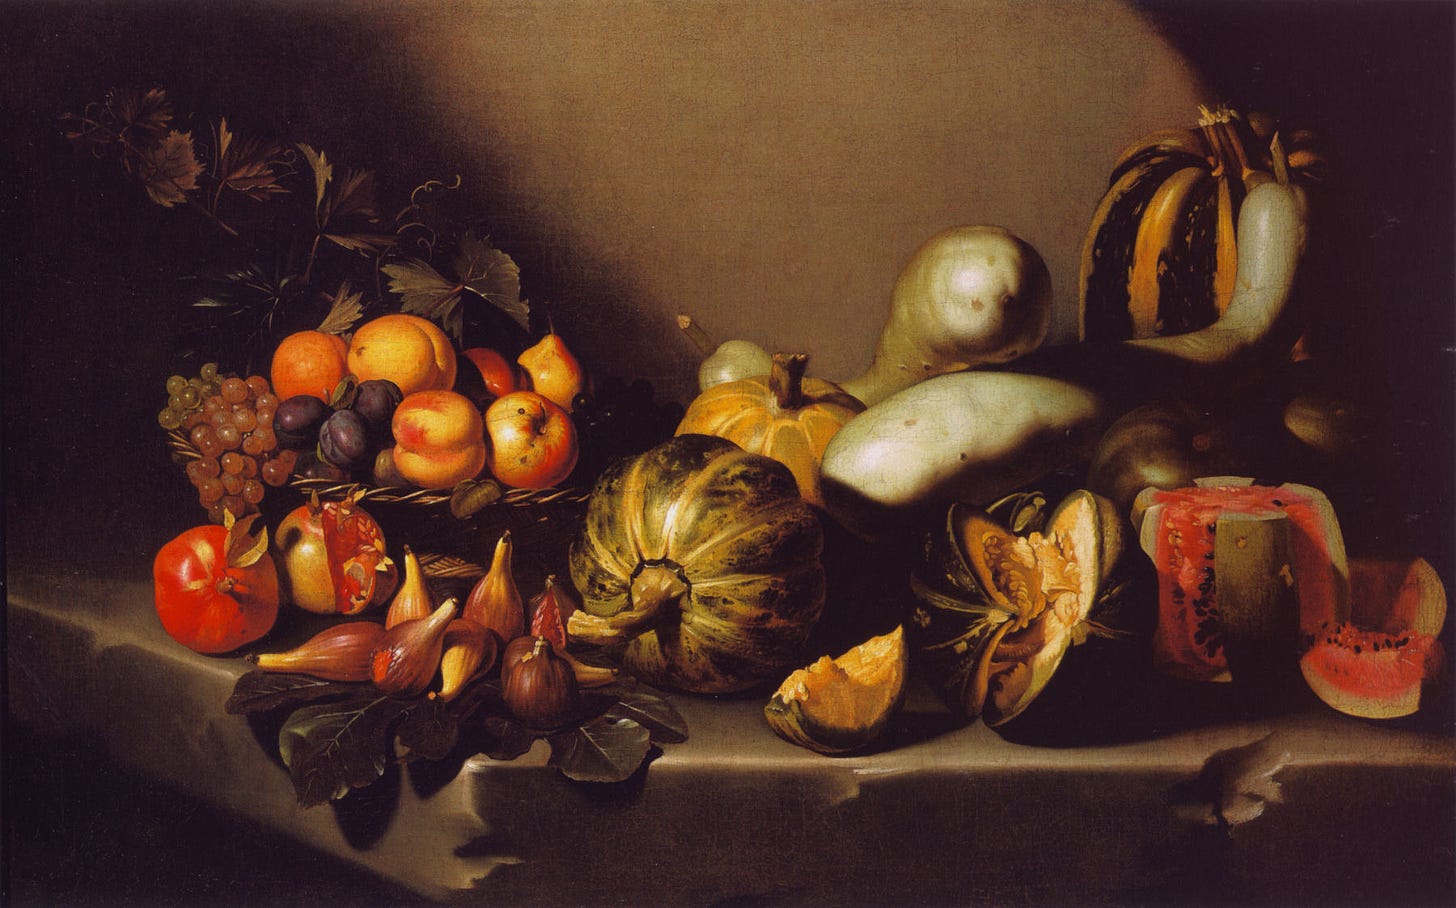 https://upload.wikimedia.org/wikipedia/commons/1/15/Caravaggio_-_Still_Life_with_Fruit_%28circa_1603%29.png